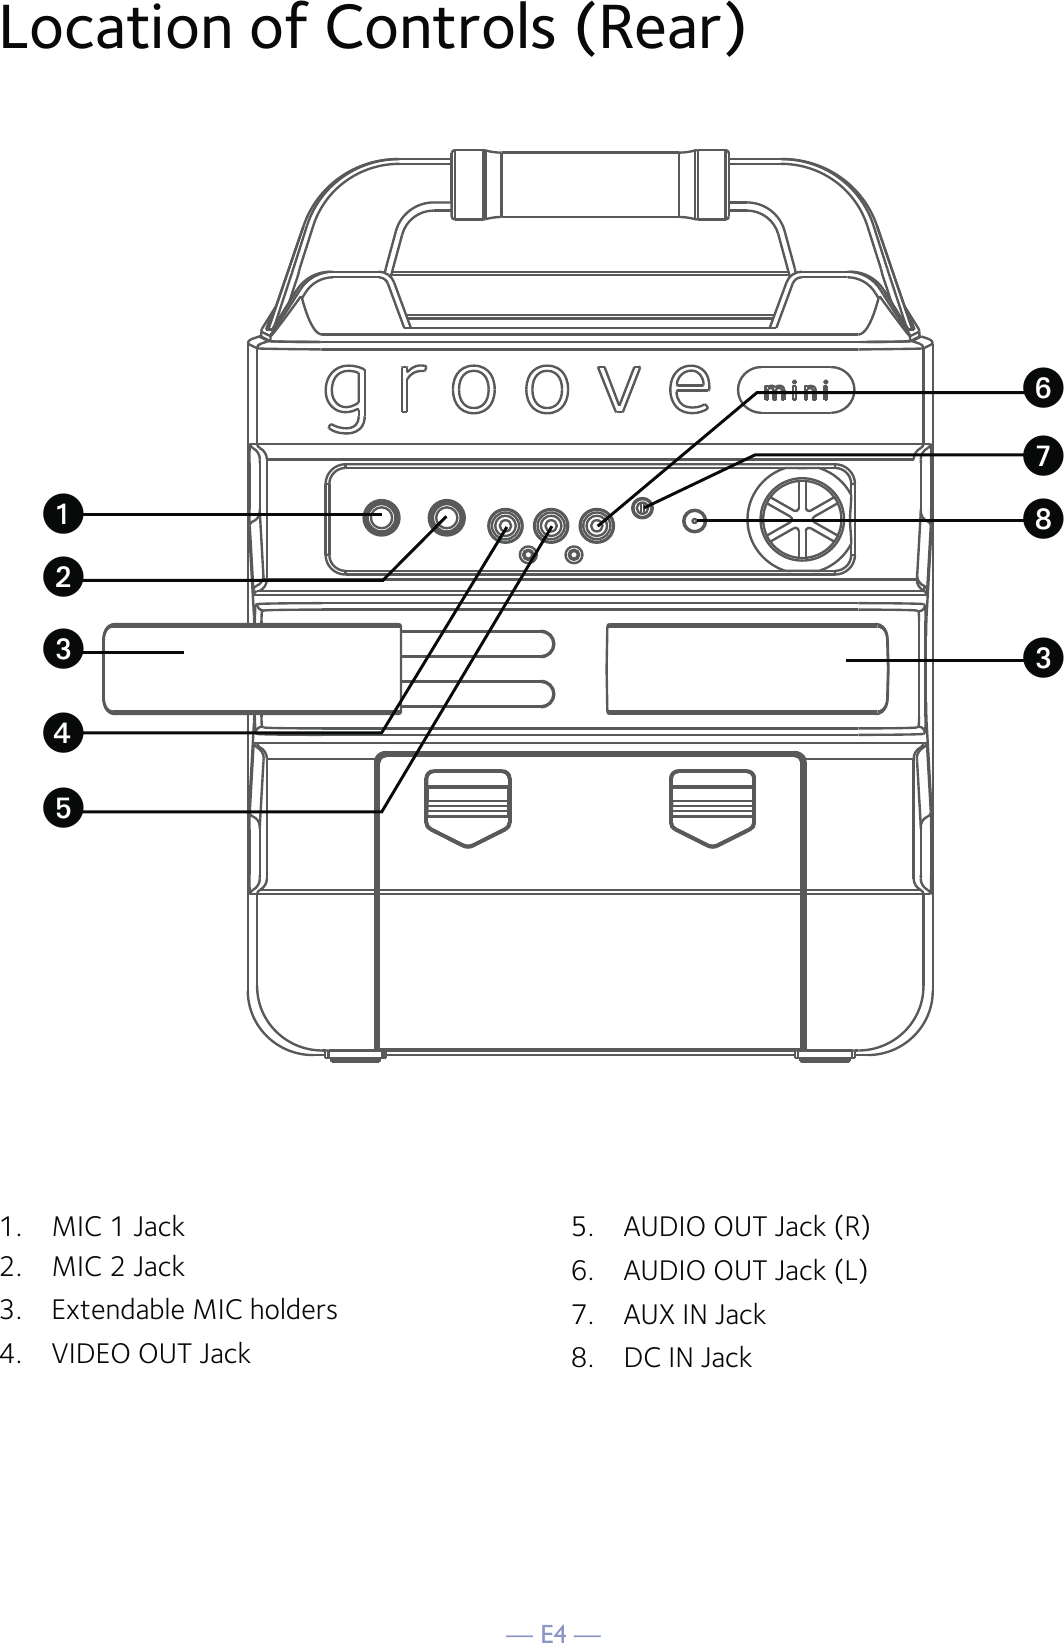 — E4 —Location of Controls (Rear)1.  MIC 1 Jack2.   MIC 2 Jack3.  Extendable MIC holders4. VIDEO OUT Jack5.  AUDIO OUT Jack (R) 6.  AUDIO OUT Jack (L) 7.   AUX IN Jack 8.  DC IN JackuVWvywwUx